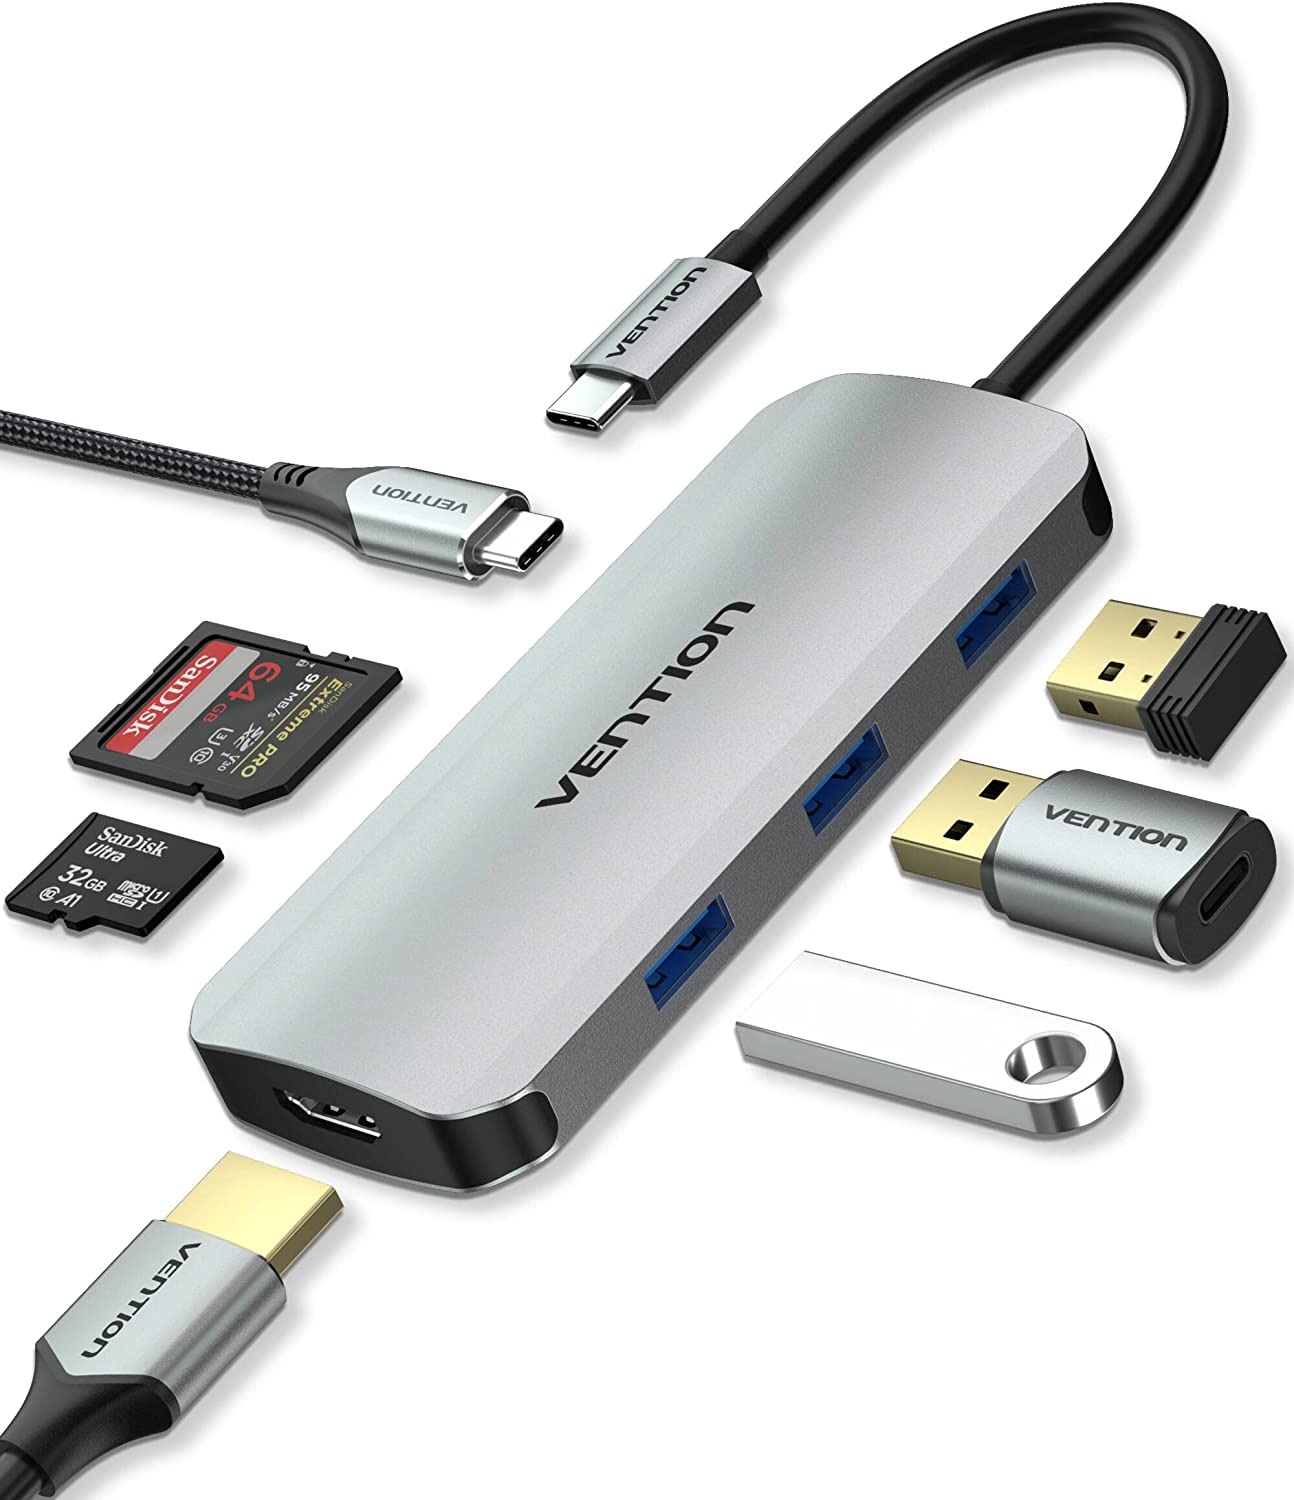 Vention 7 in 1 USB Type C Hub with 4K HDMI Output, 5Gbps USB 3.0 Ports, SD / microSD Card Reader, & Fast Charging USB-C Power Delivery Adapter Dock | TOJHB